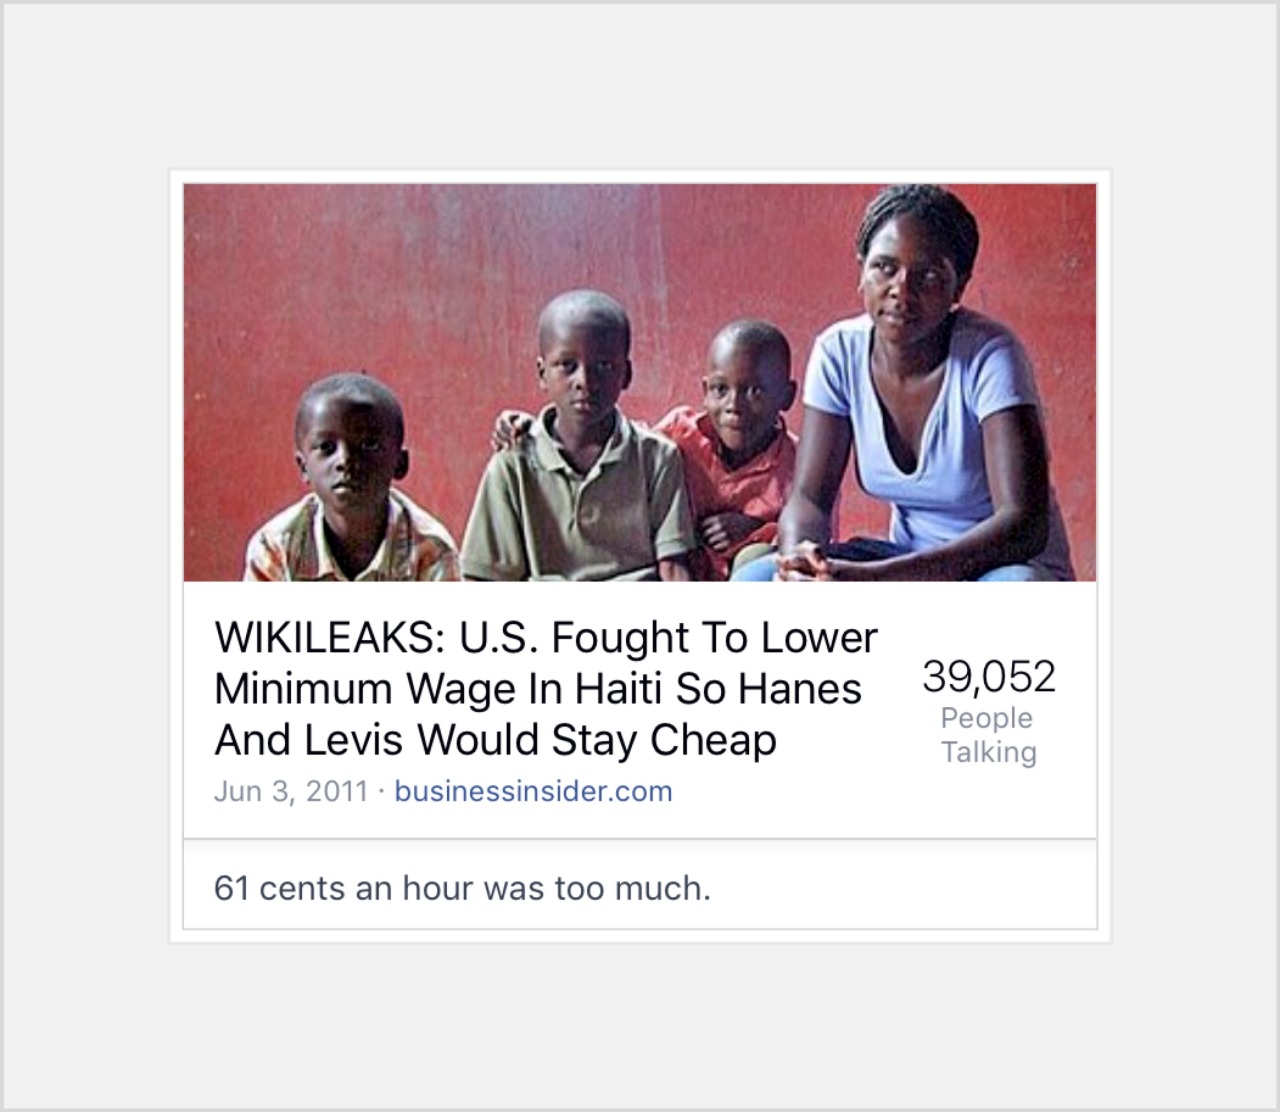 artdream:  When the minimum wage in Haiti was raised  to 61 cents an hour, Hillary